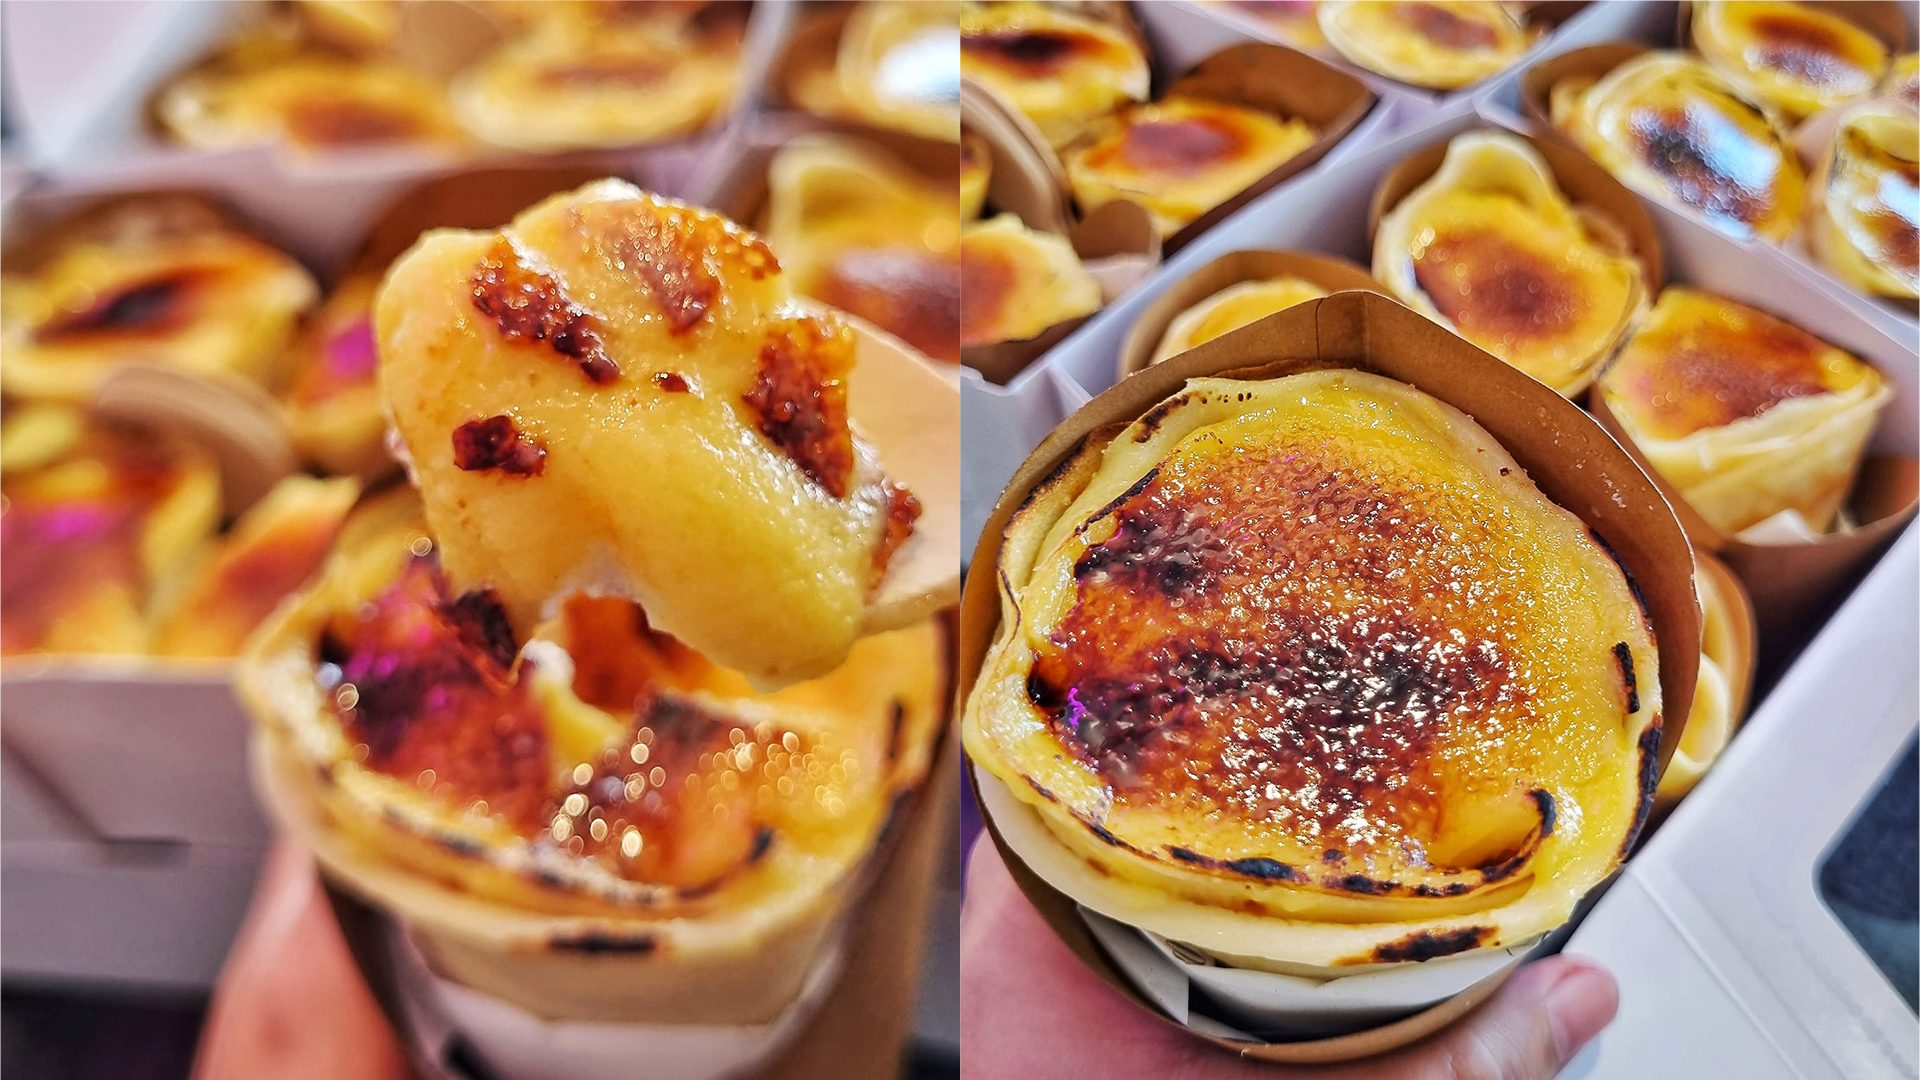 Sweet treat! Try Crepe Brulée cones from this Las Piñas City bakery